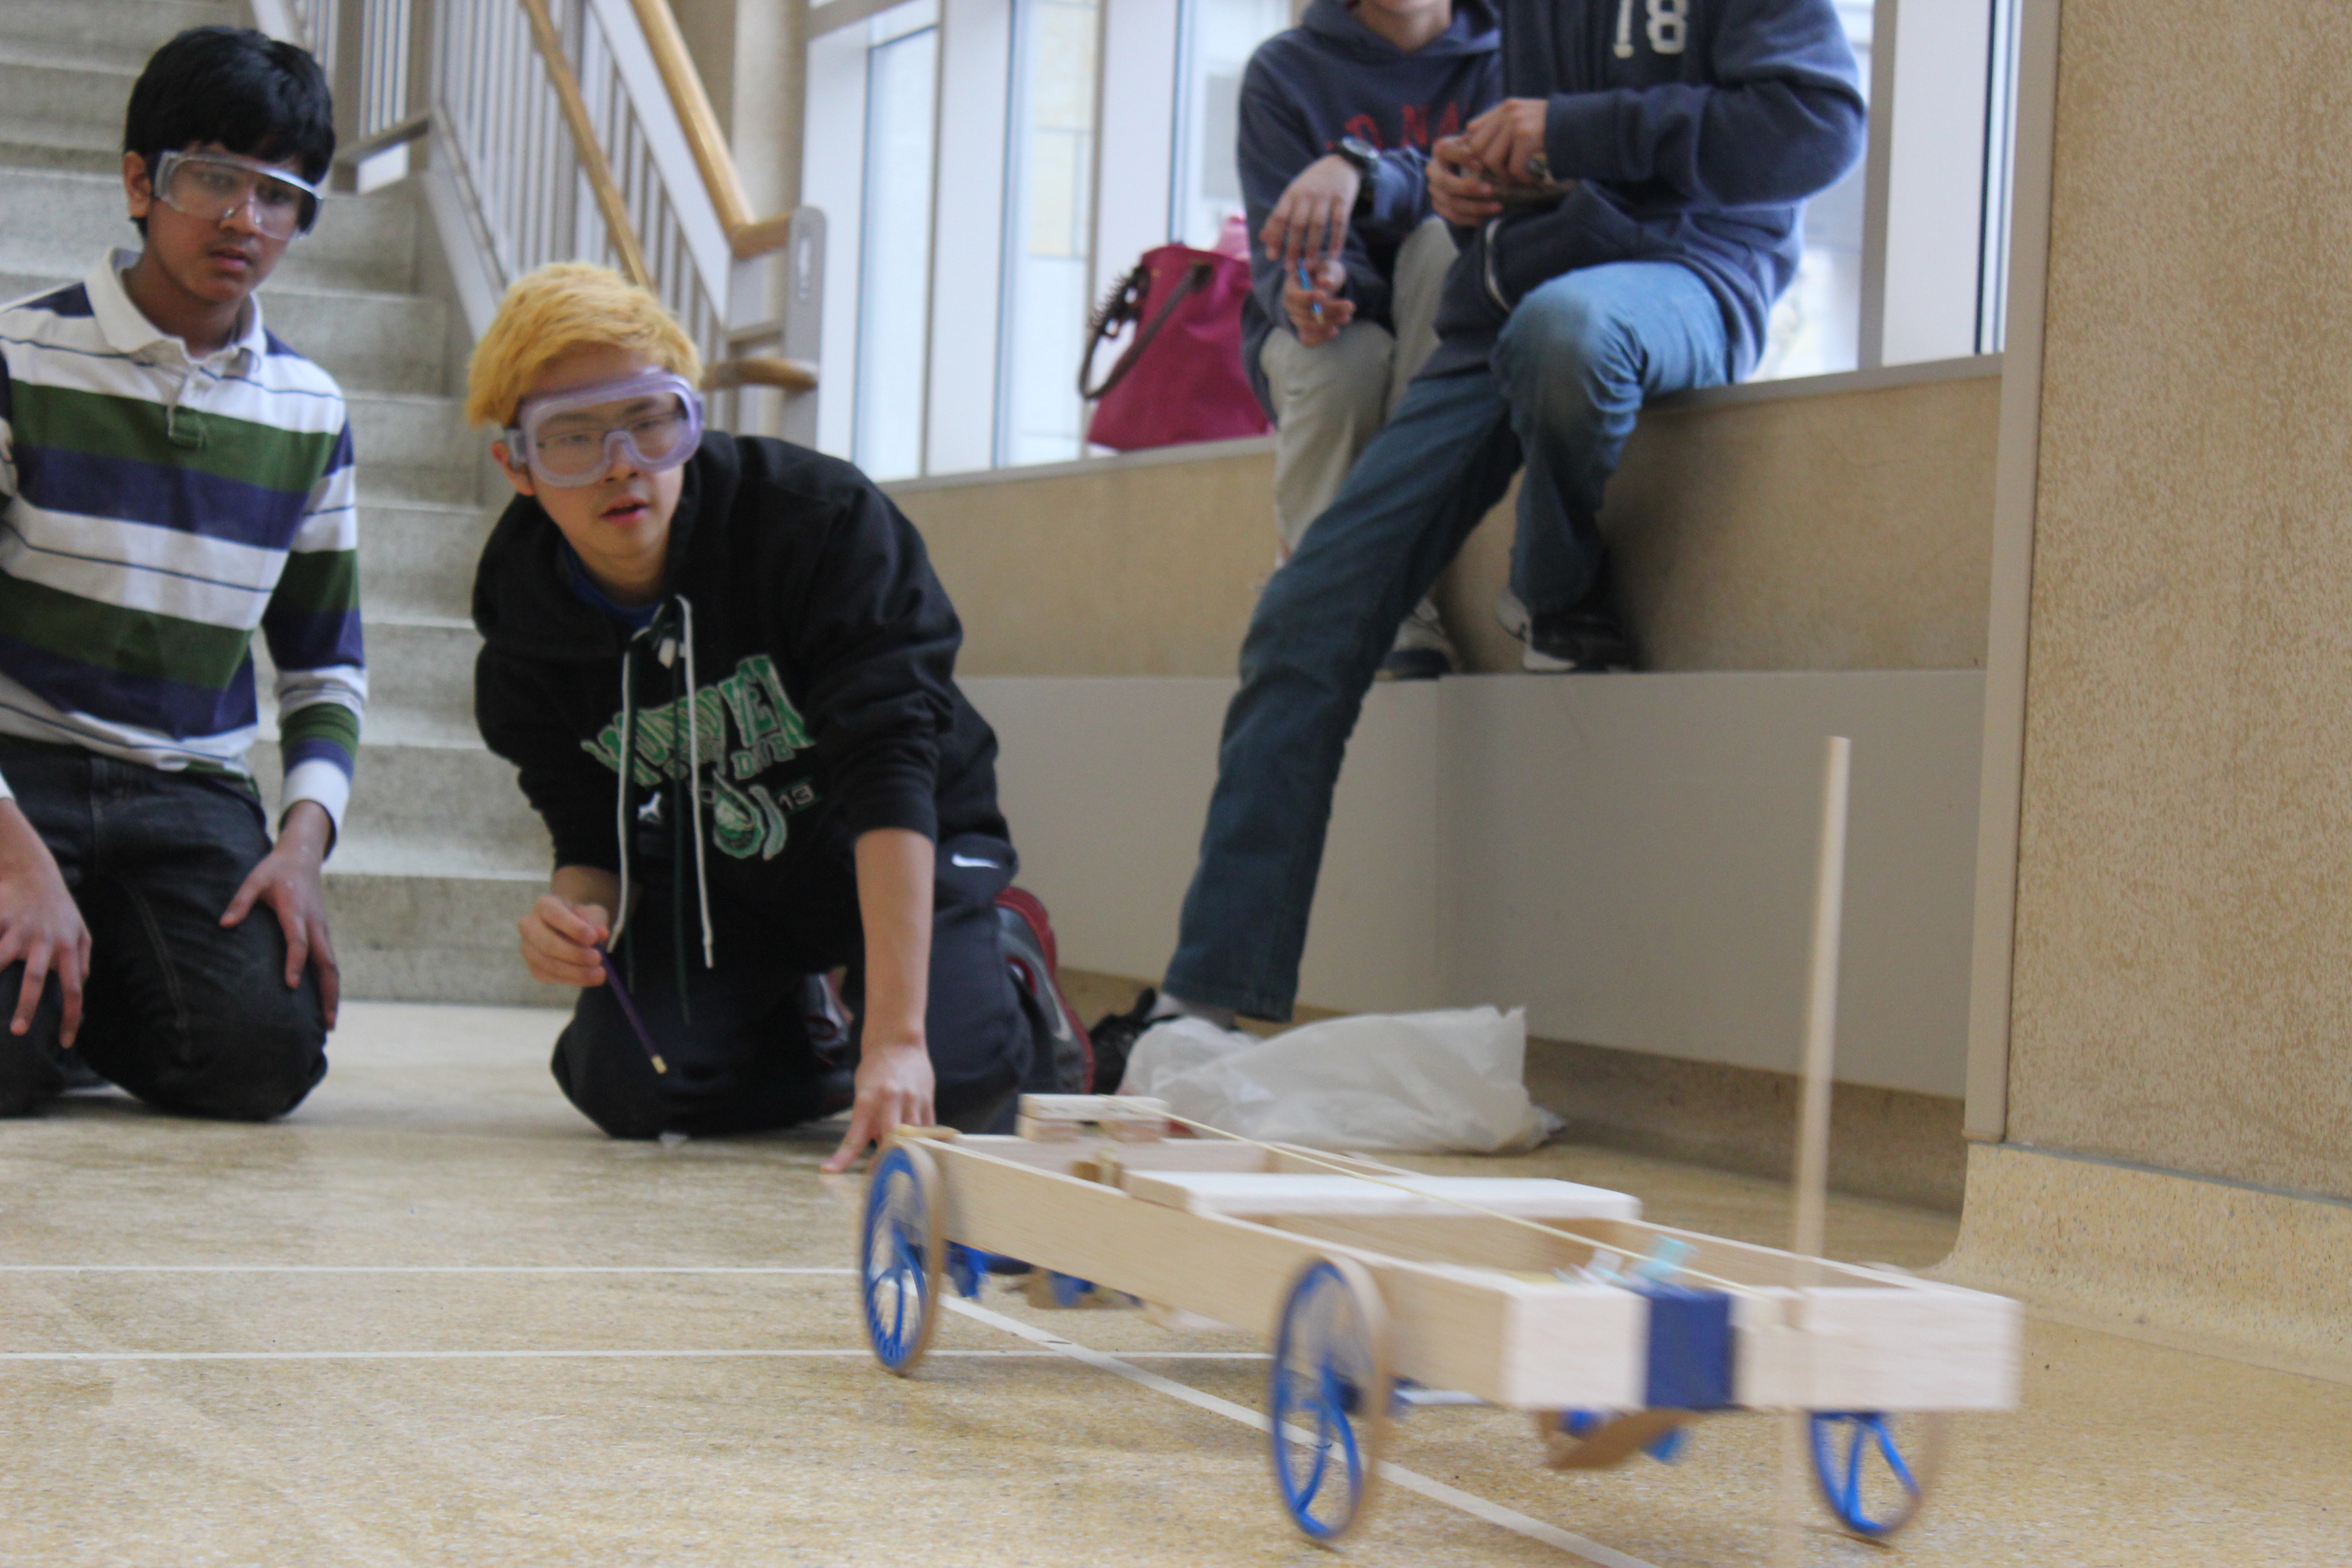 Students launching a wheeled vehicle in Science Olympiad